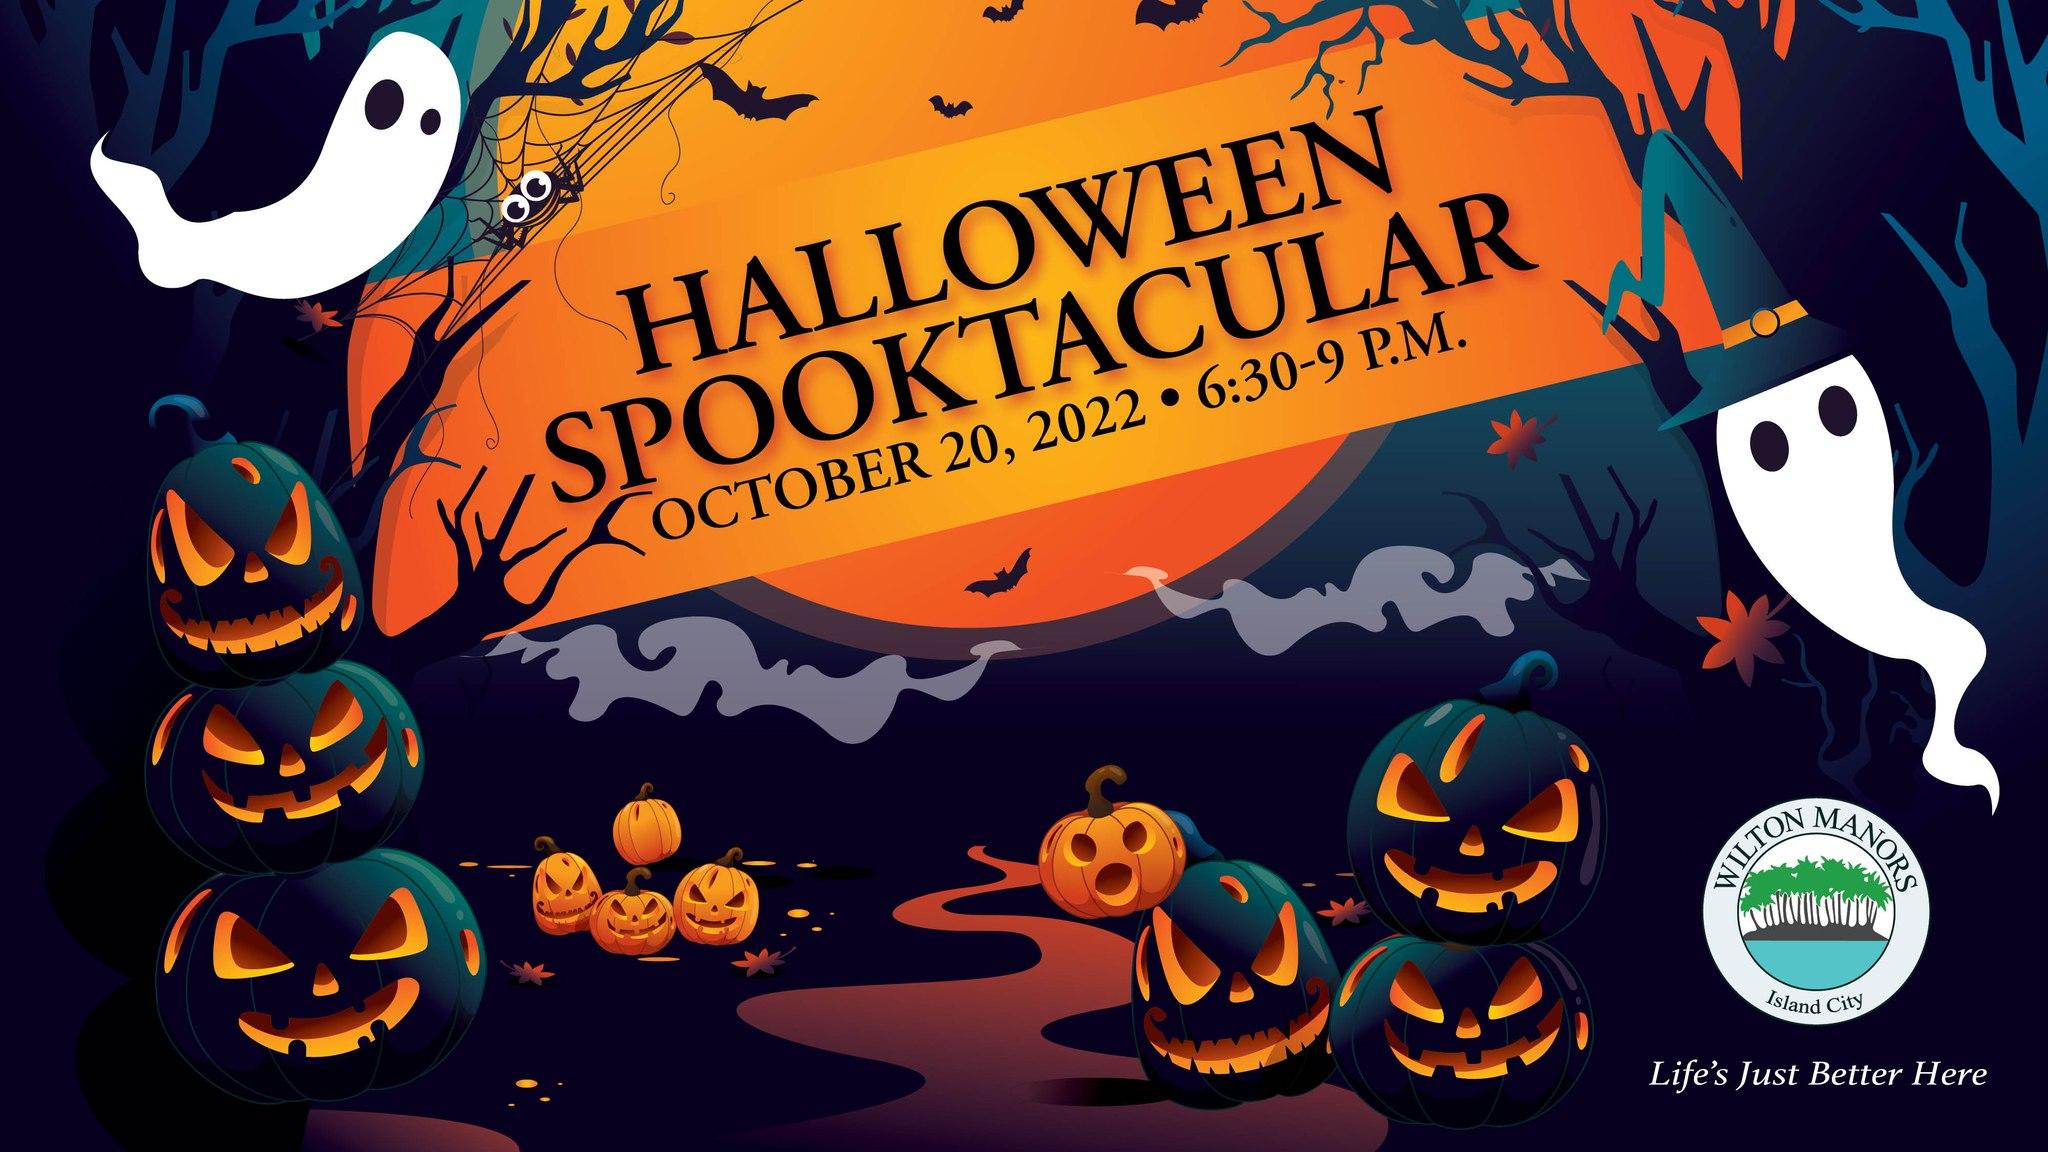 Halloween Spooktacular in Fort Lauderdale, FL
Thu Oct 20, 6:30 PM - Thu Oct 20, 9:00 PM